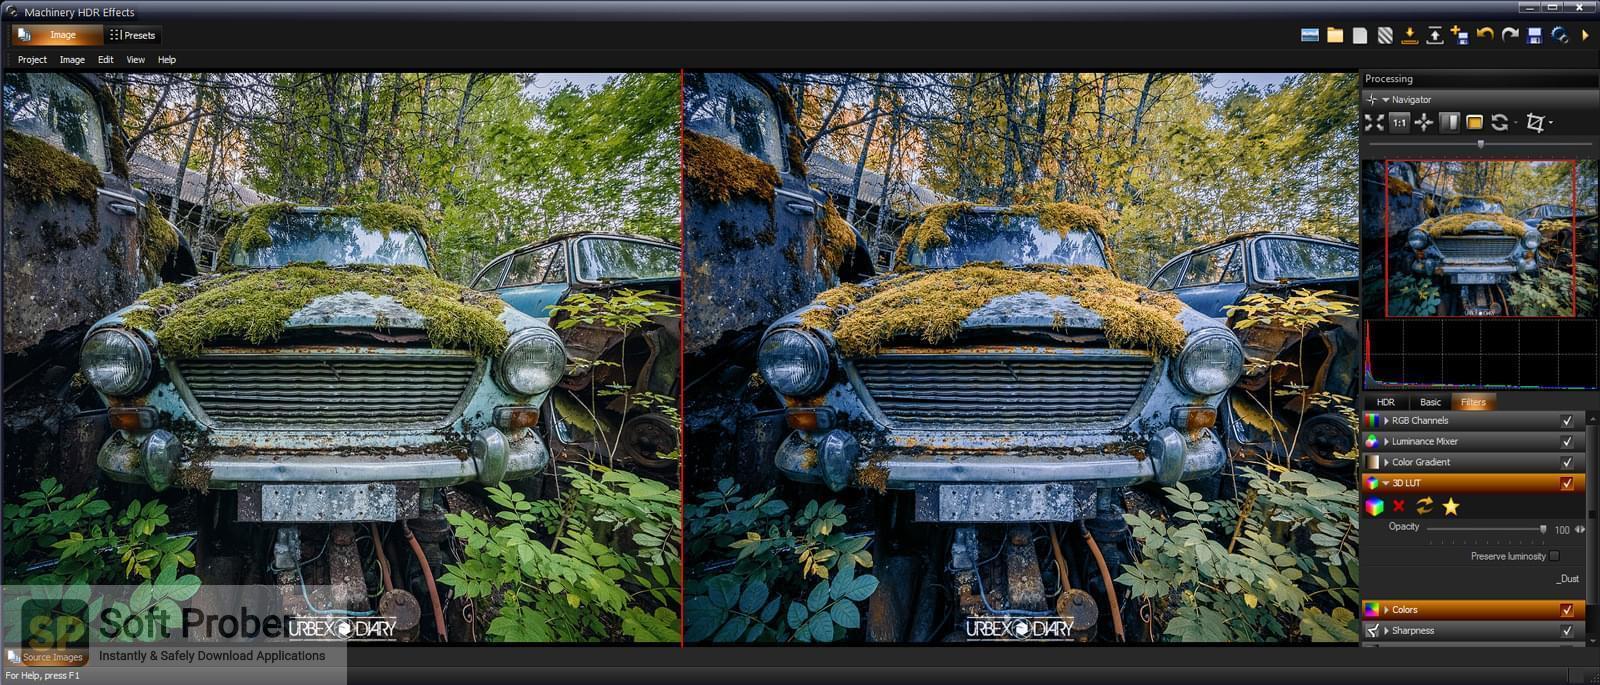 Machinery HDR Effects 3.1.4 download the last version for ios